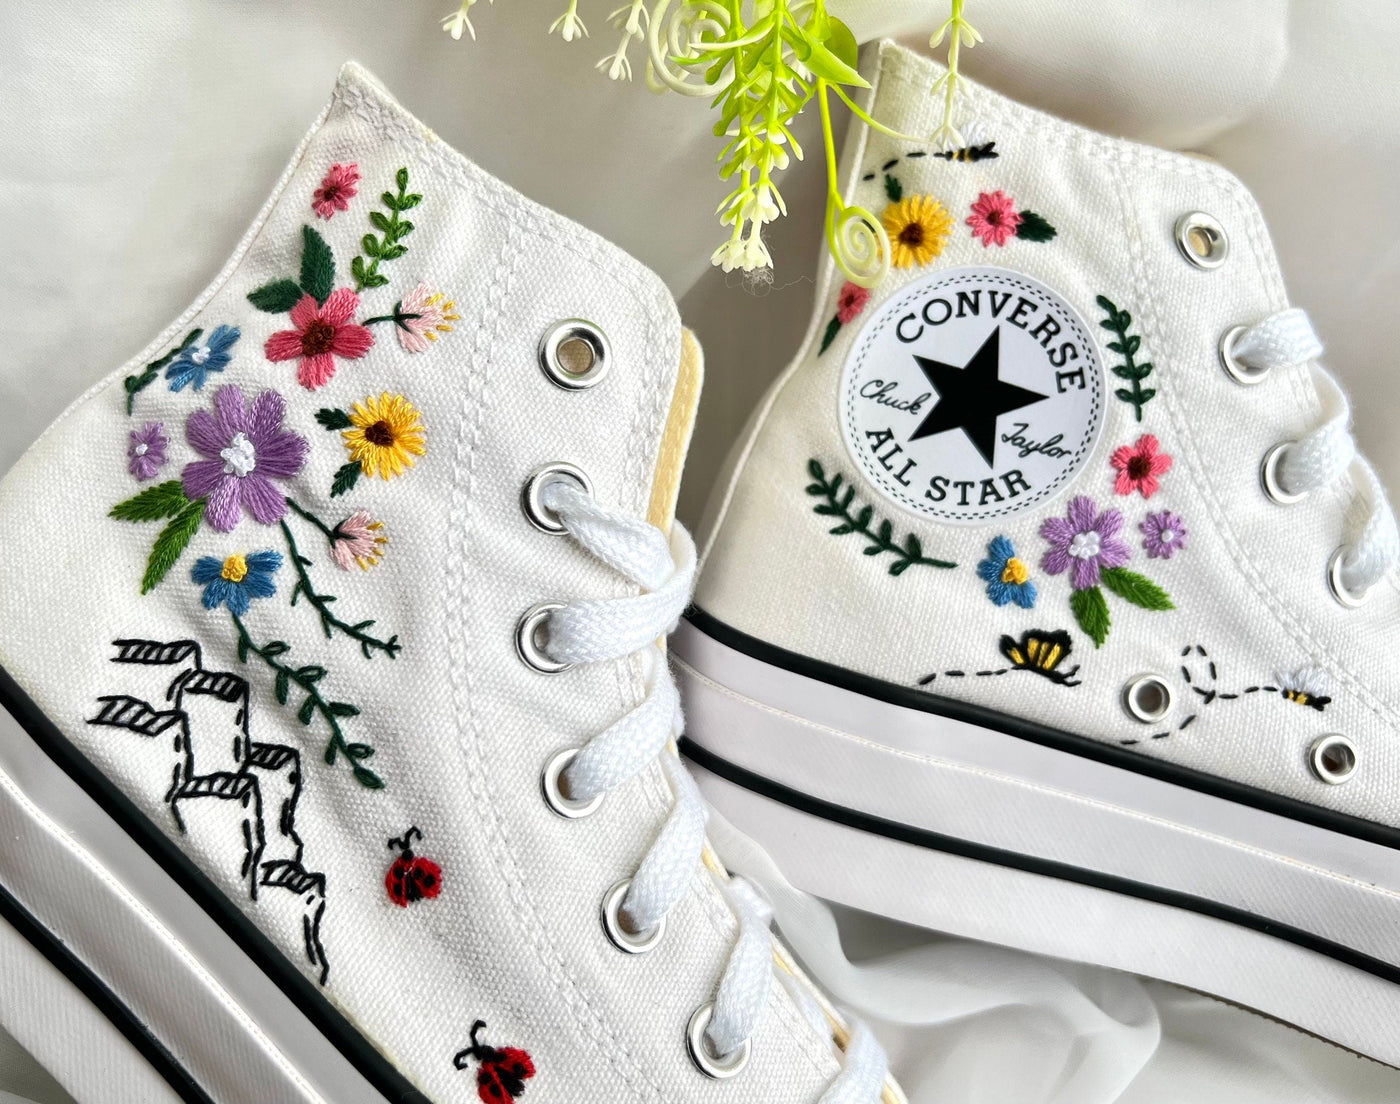 Converse Cute Butterfly Embroidery - ADA13